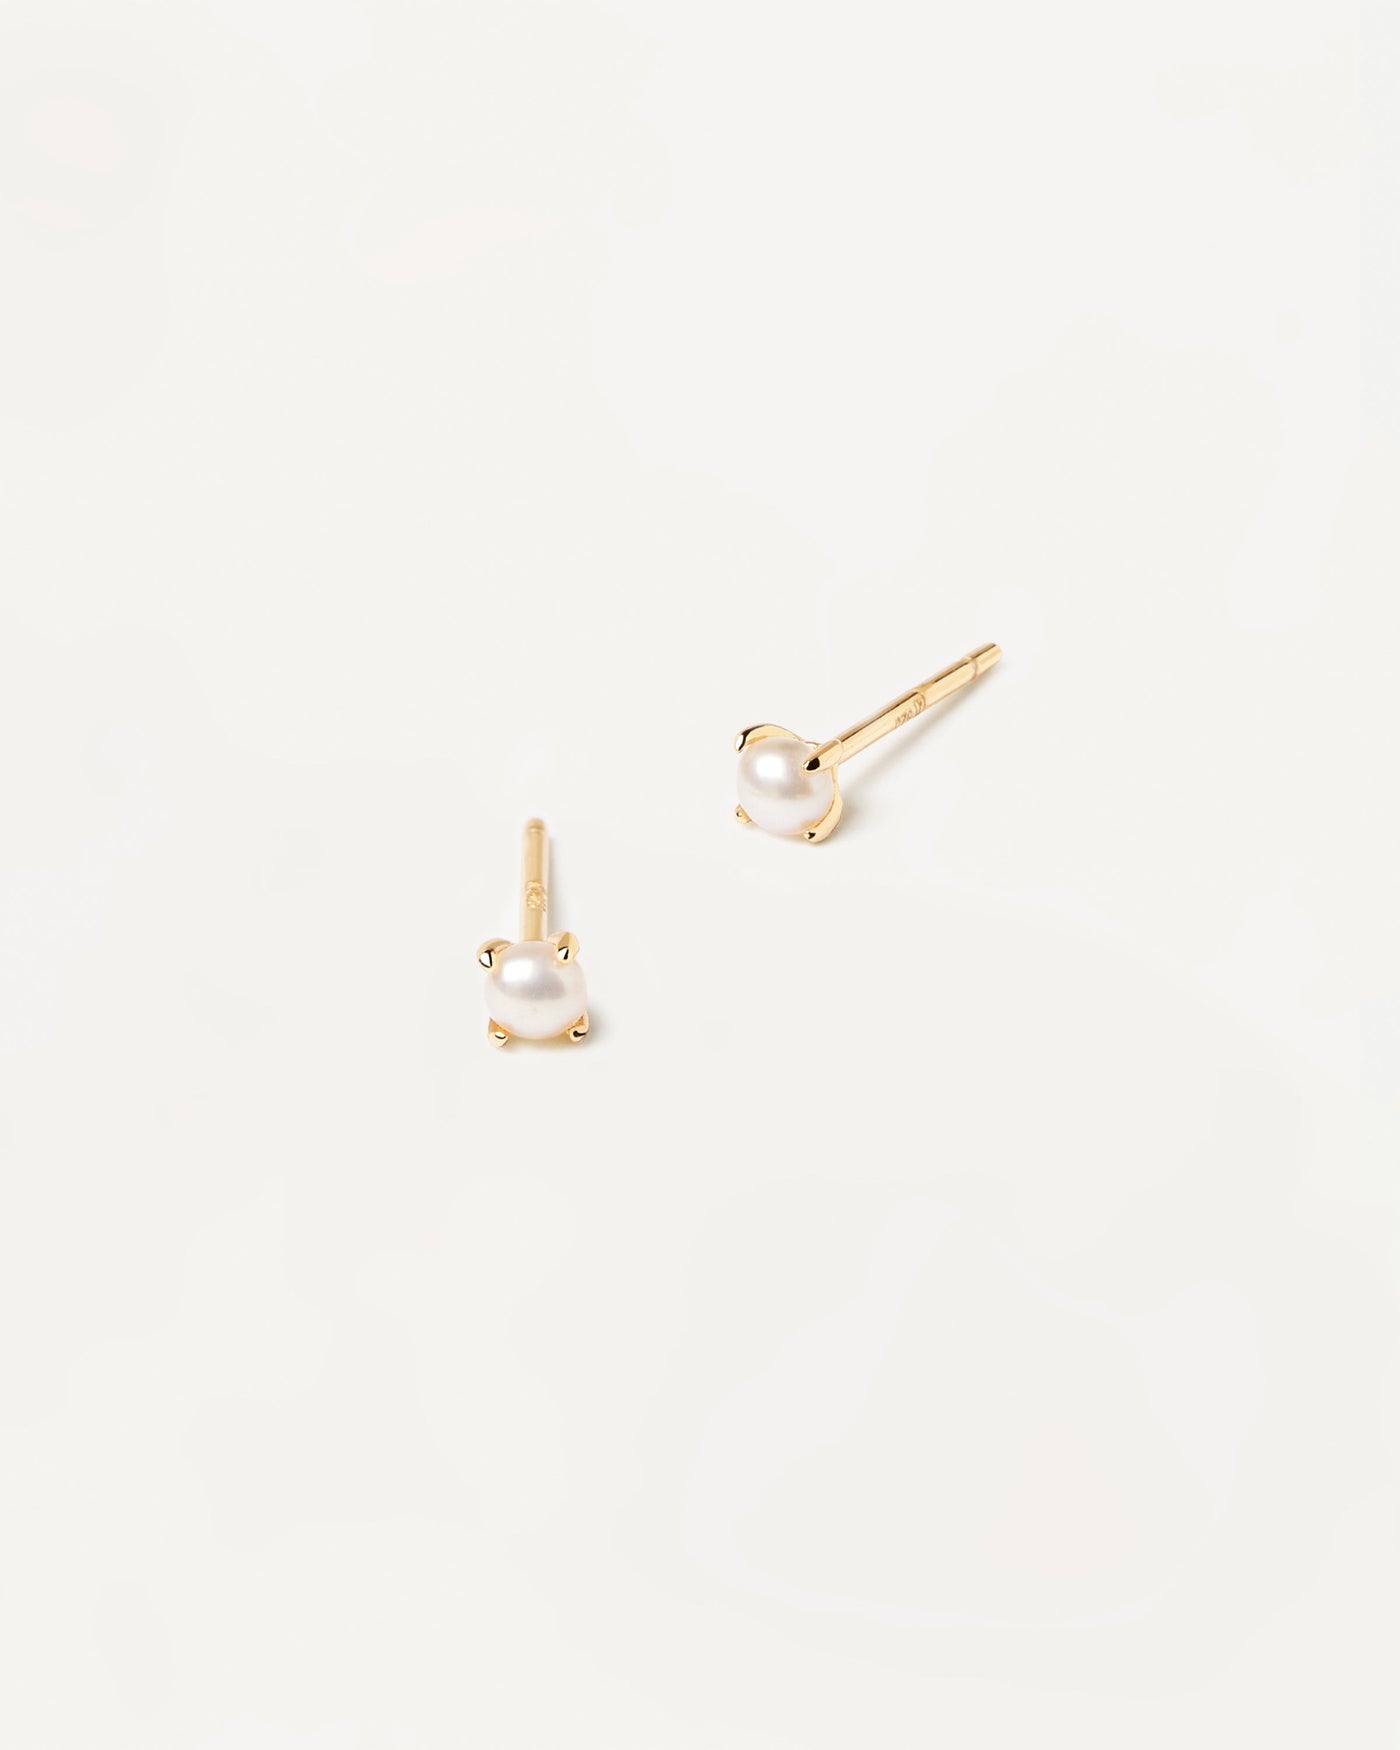 2023 Selection | Solitary Mini Pearl Earrings. Pair of 18k gold plated single small natural pearl studs set on prongs. Get the latest arrival from PDPAOLA. Place your order safely and get this Best Seller. Free Shipping.